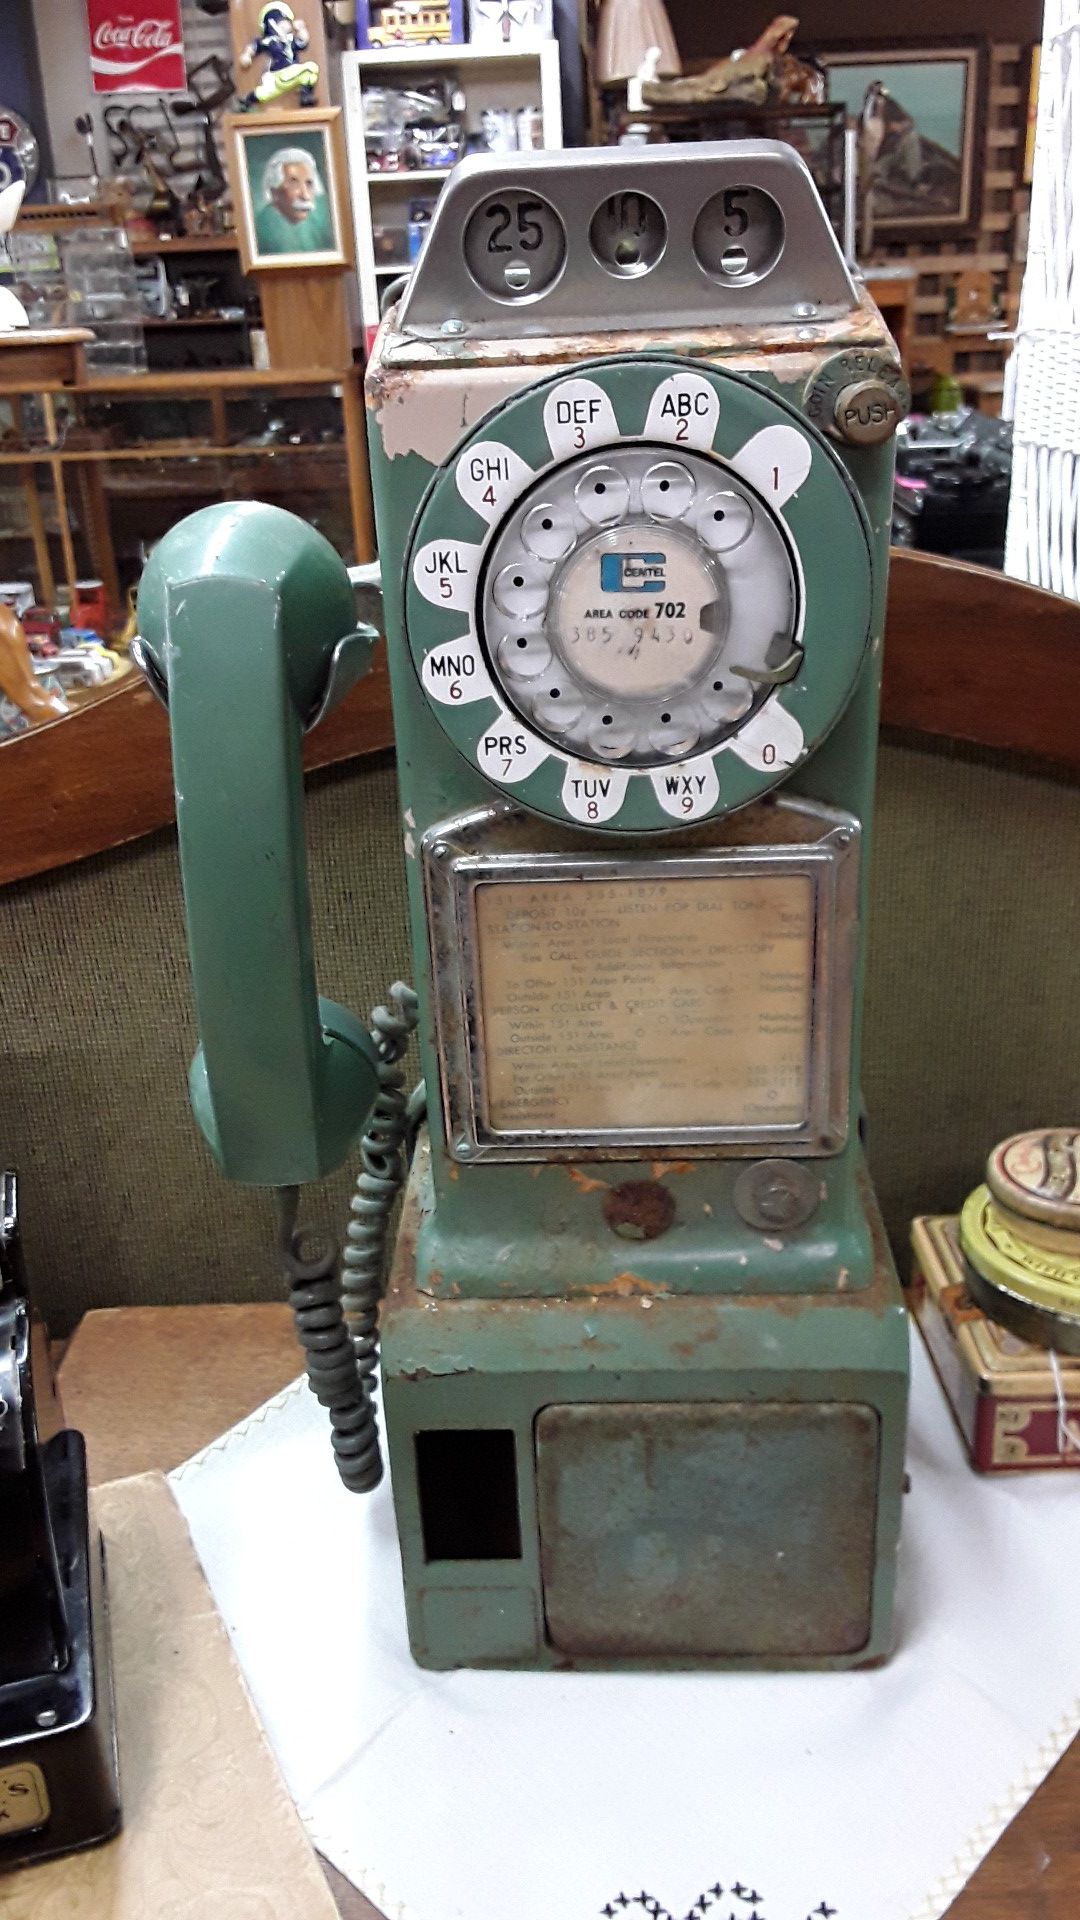 Vintage rotary pay phone